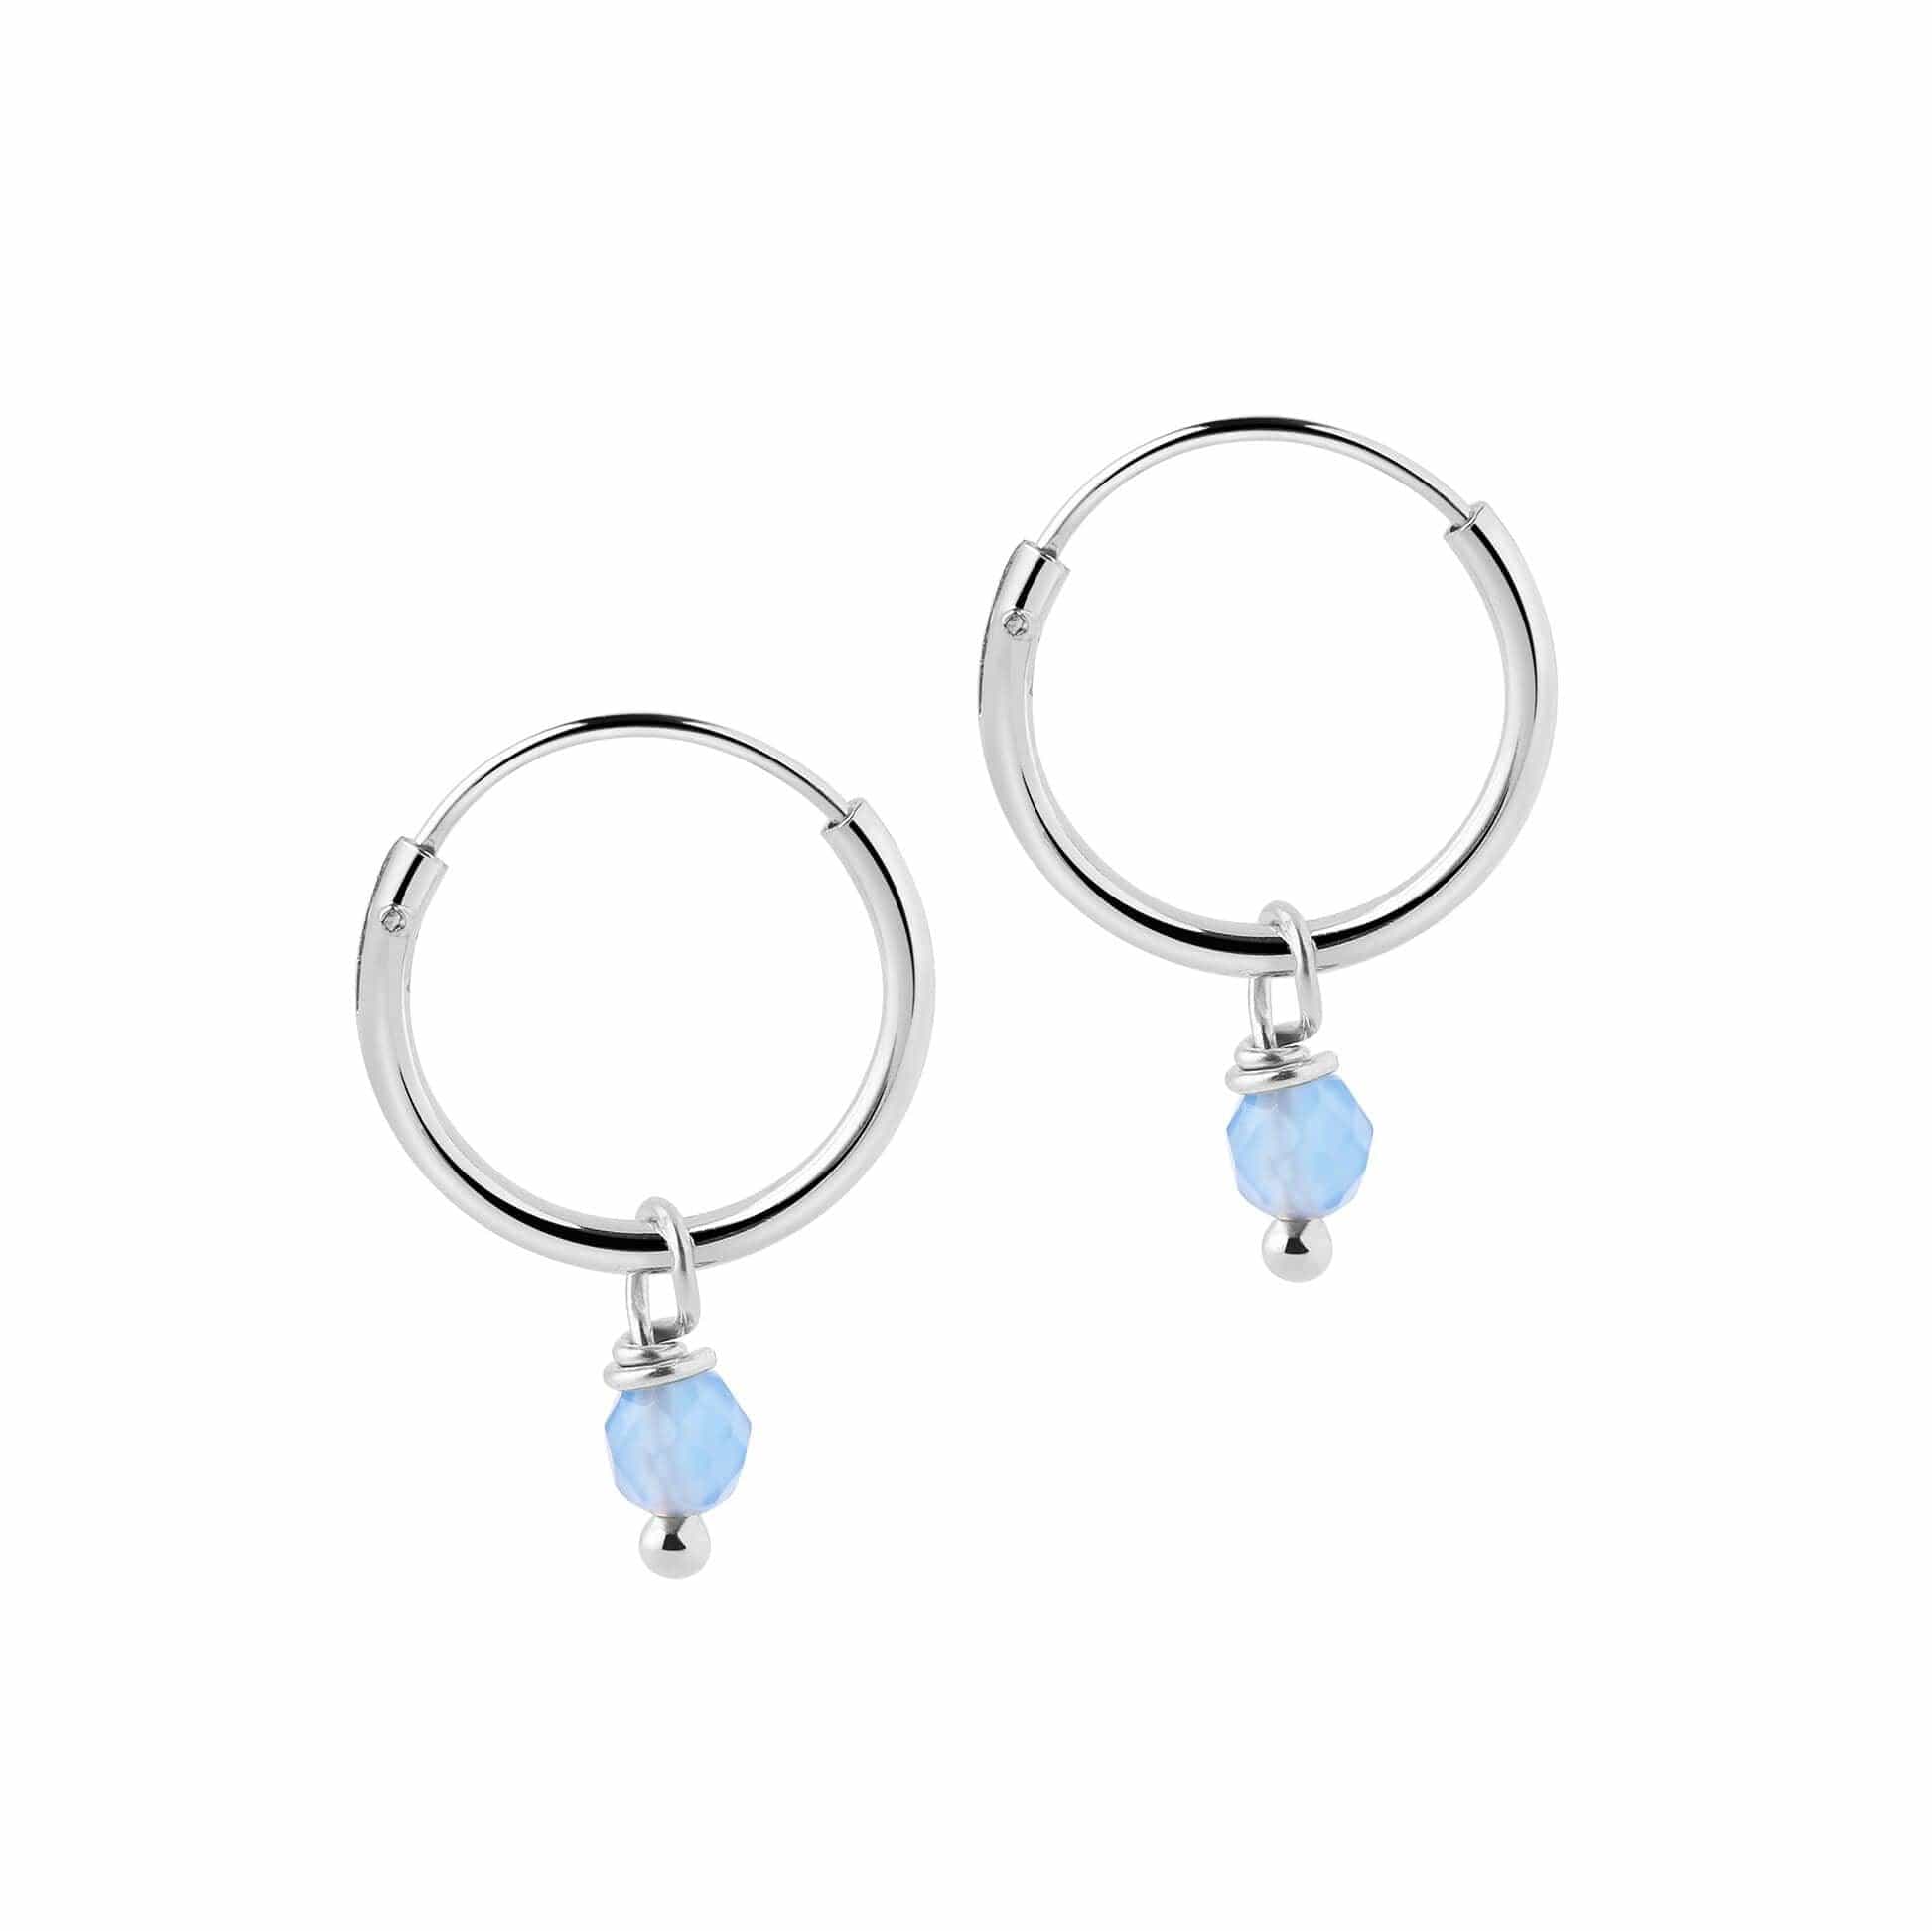 Small Silver Hoop Earrings with Blue Stone 12mm